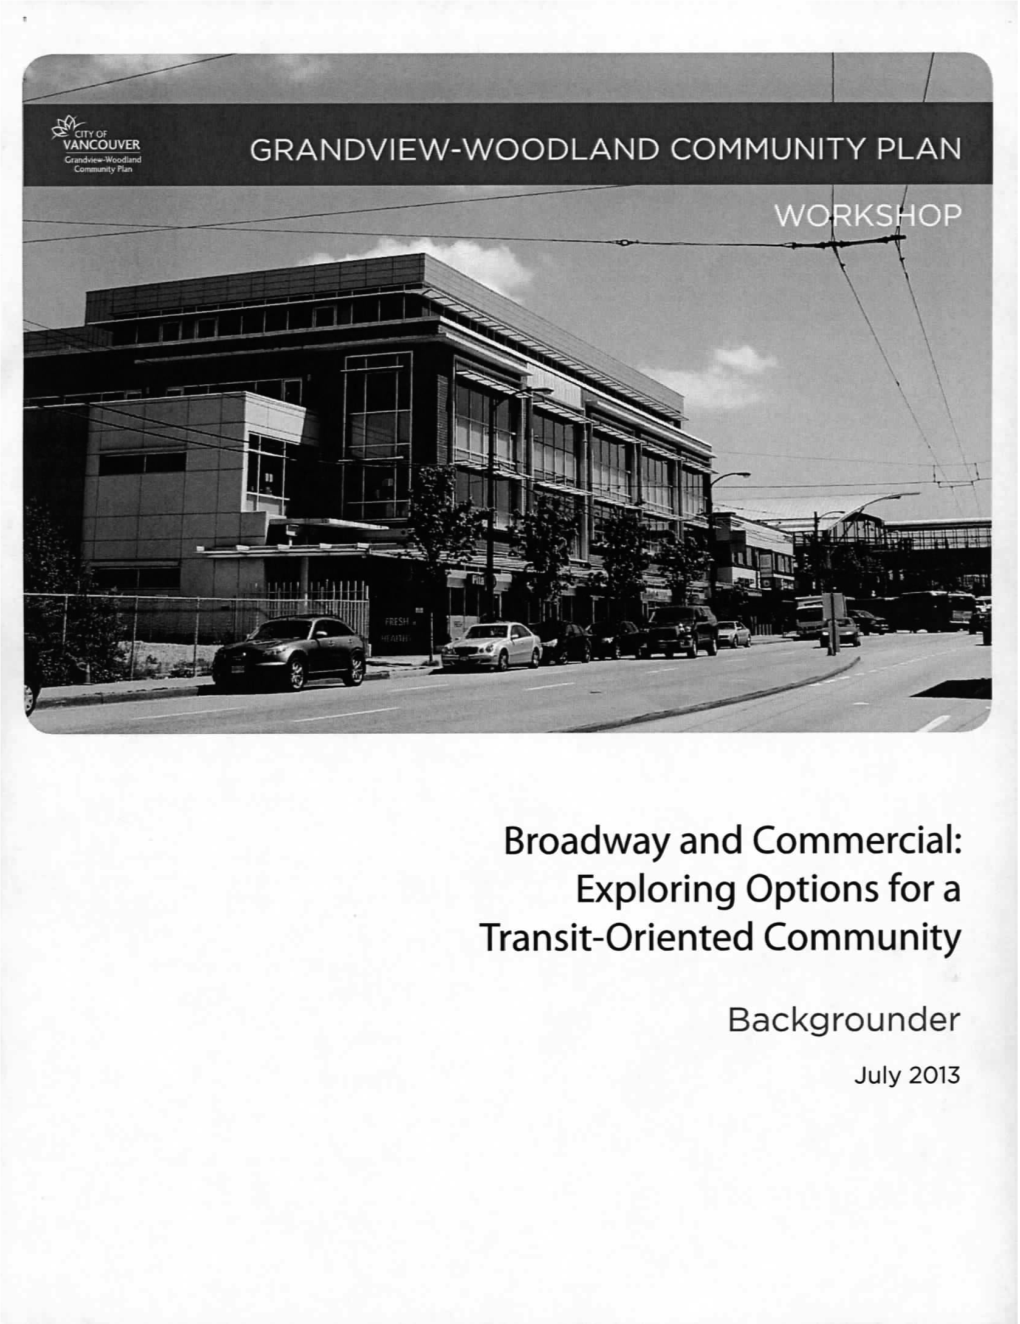 Broadway and Commercial: Exploring Options for a Transit-Oriented Community